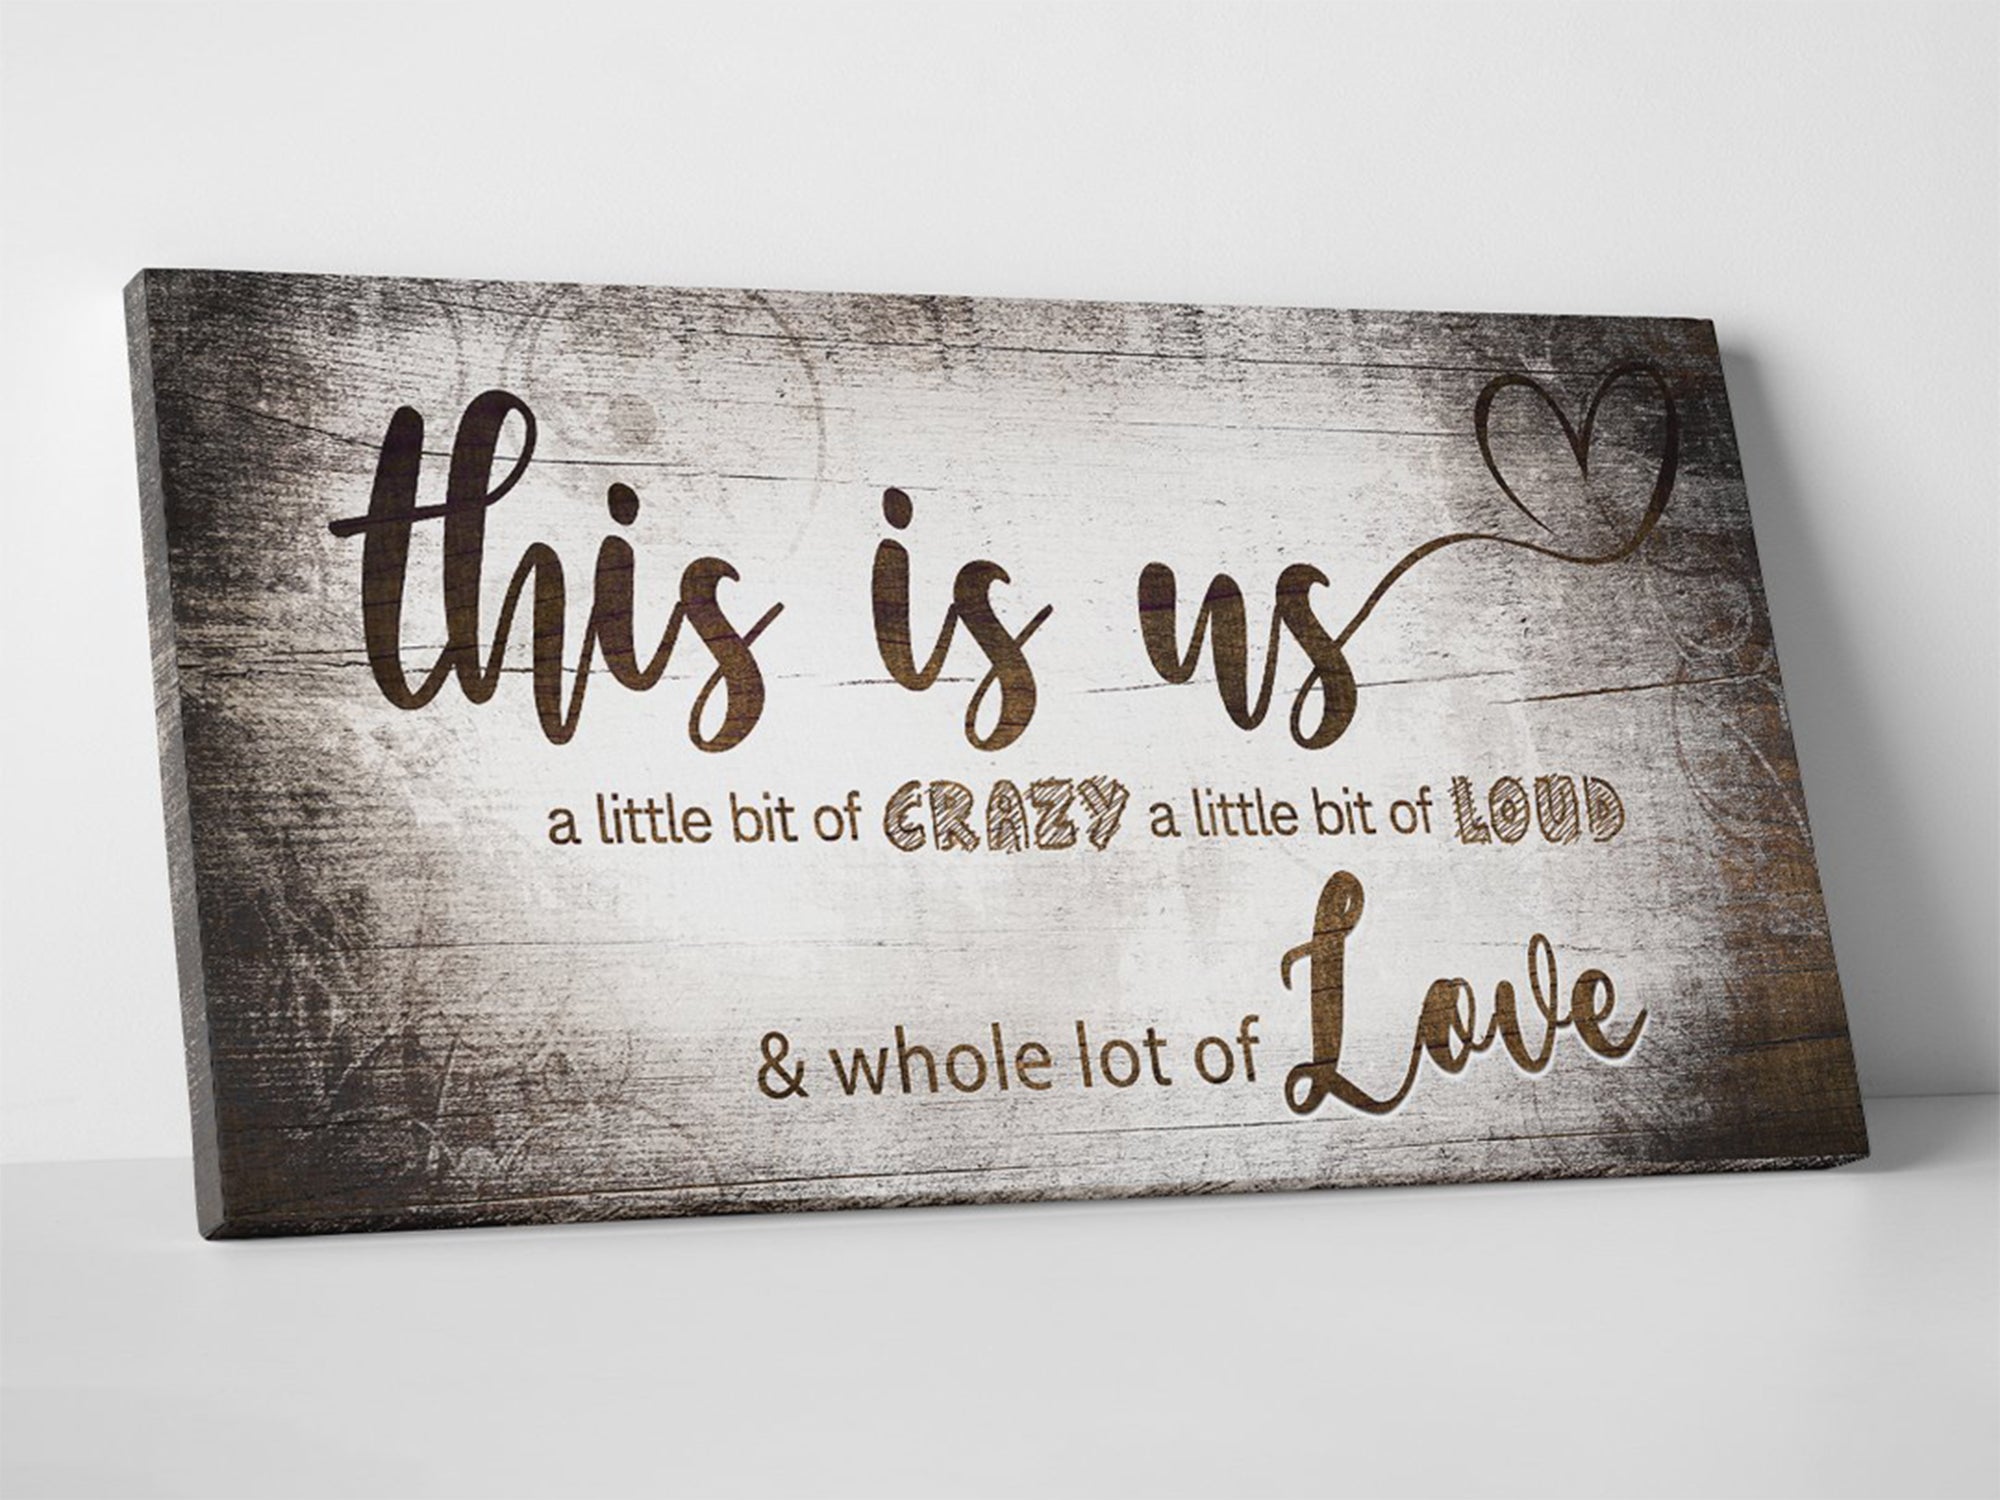 This Is Us A Little Crazy V2 Bedroom Wall Art